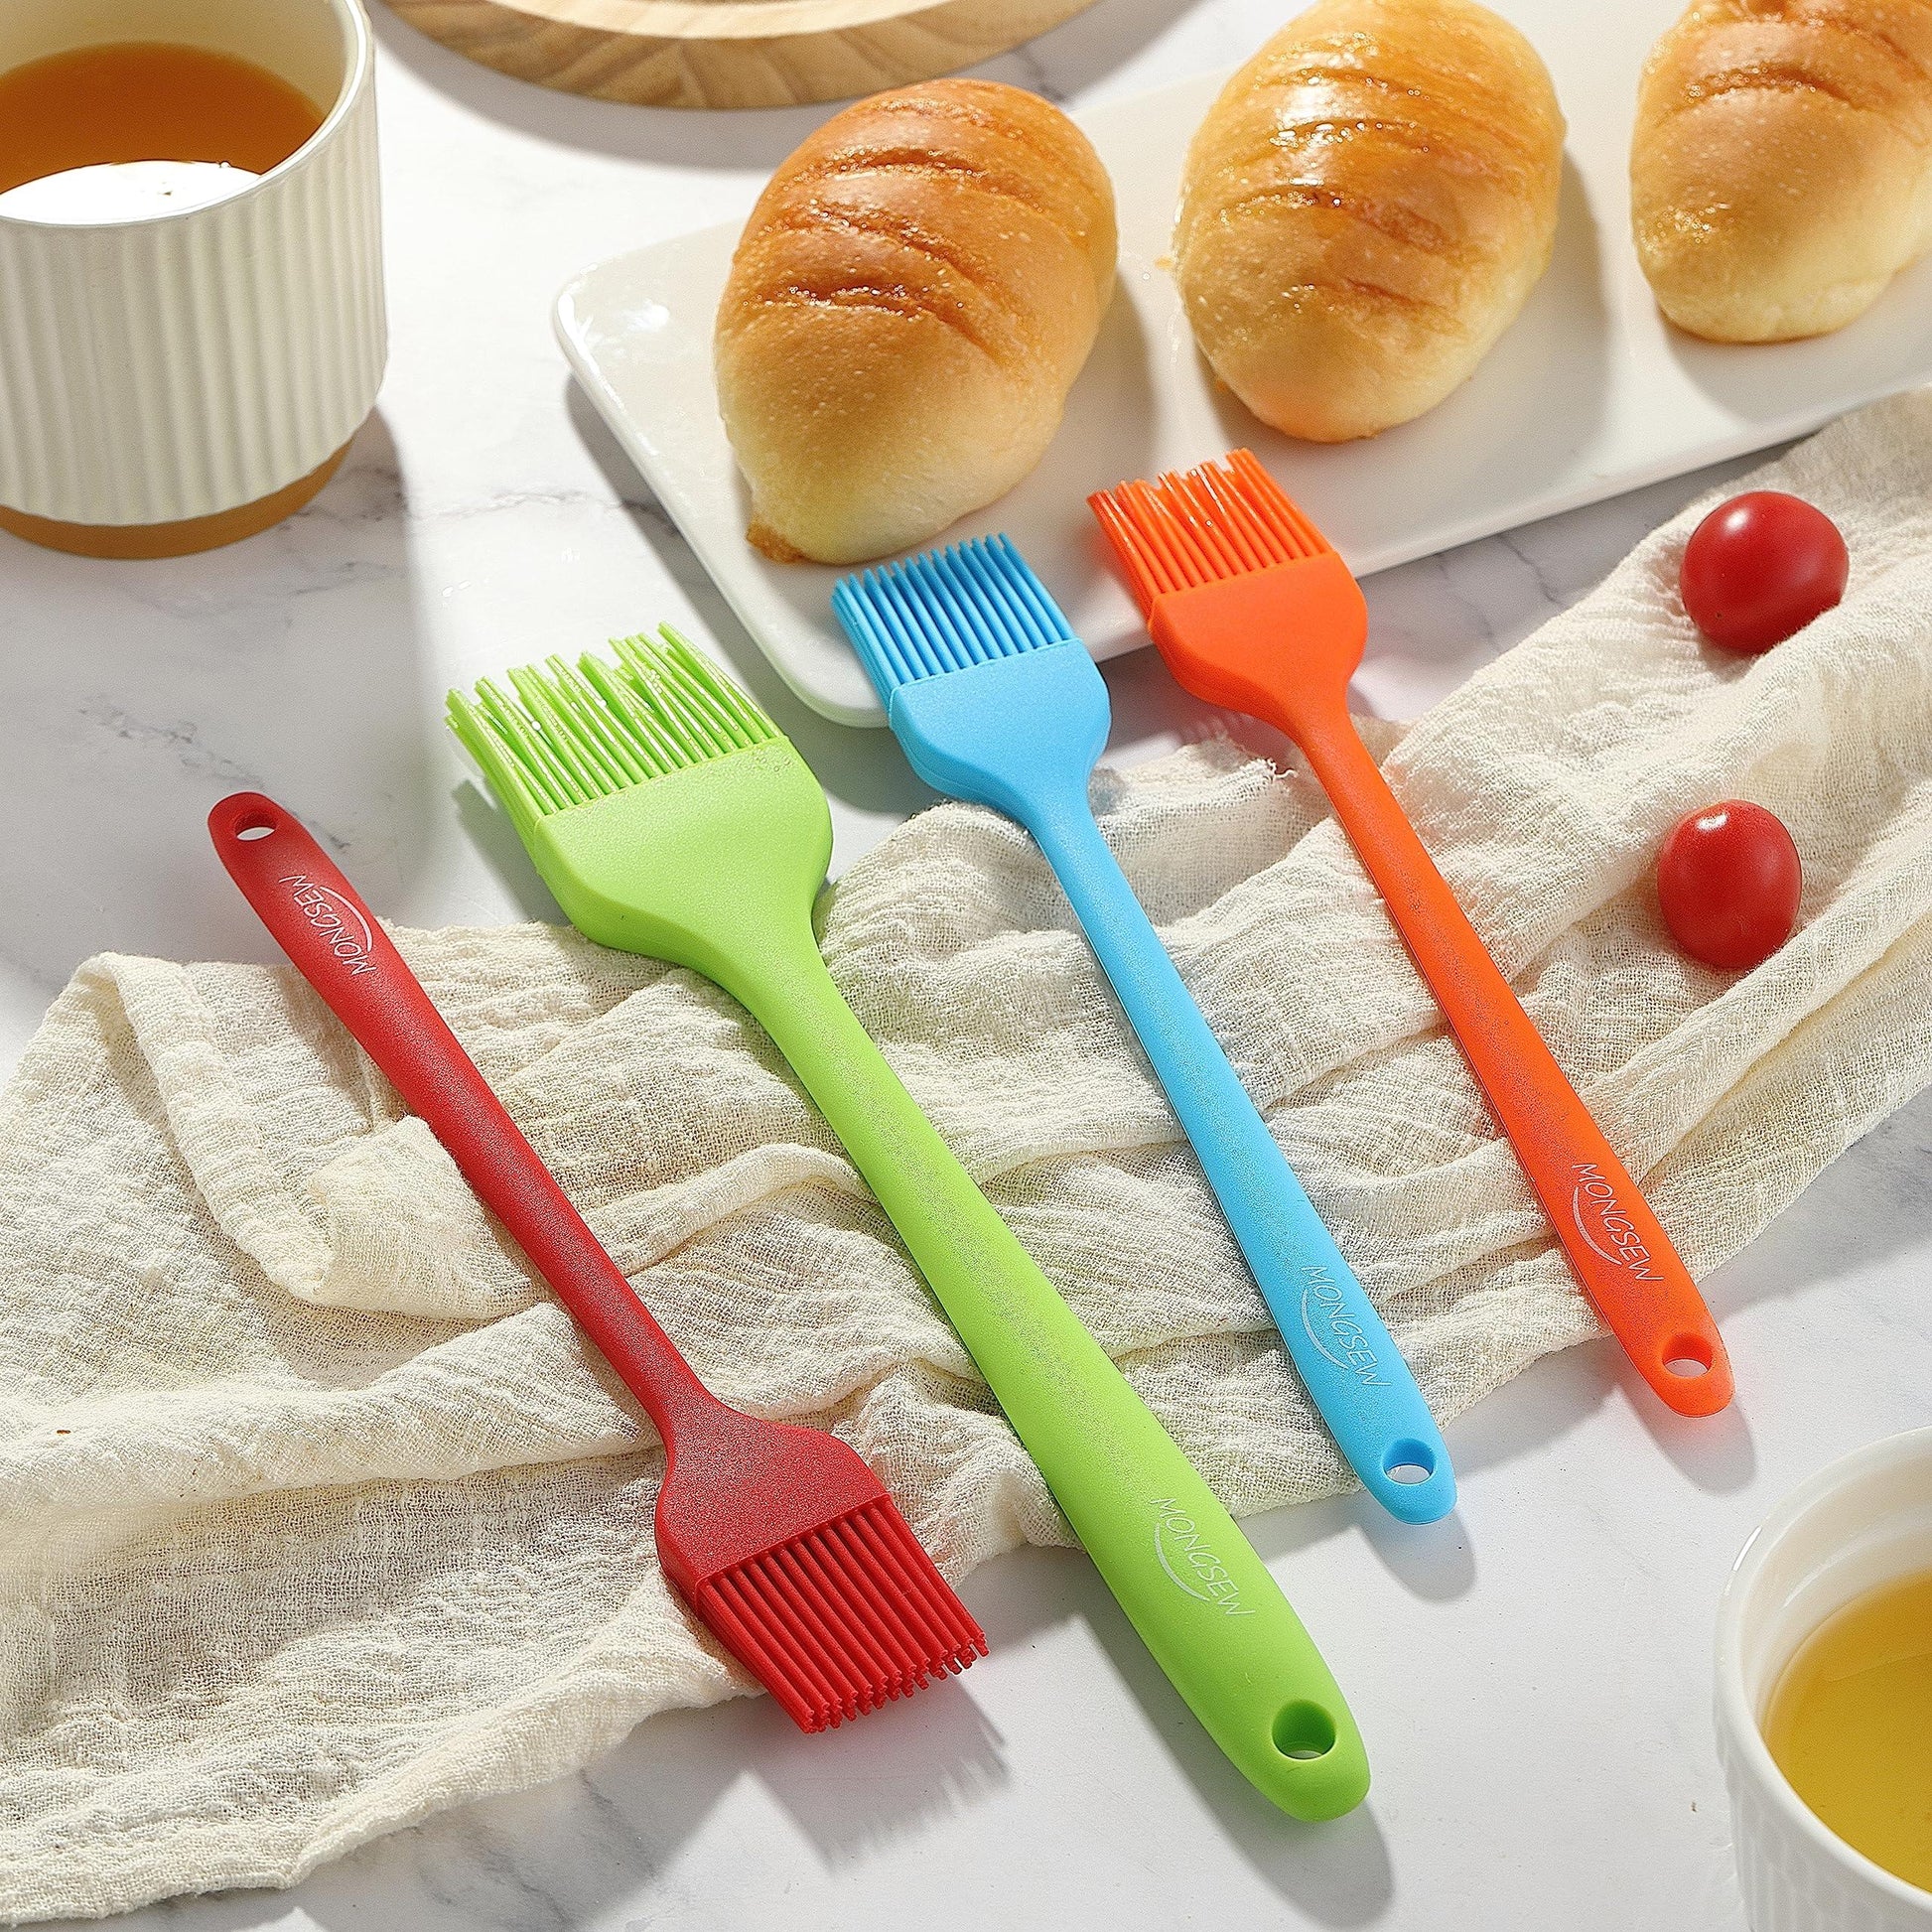 4PCS Silicone Basting Pastry Brush, MONGSEW Heat Resistant Food Brush Spread Oil Butter Sauce for BBQ Grill Baking Kitchen Cooking, BPA Free, Dishwasher Safe (Multicolor, 4 Pcs) - CookCave